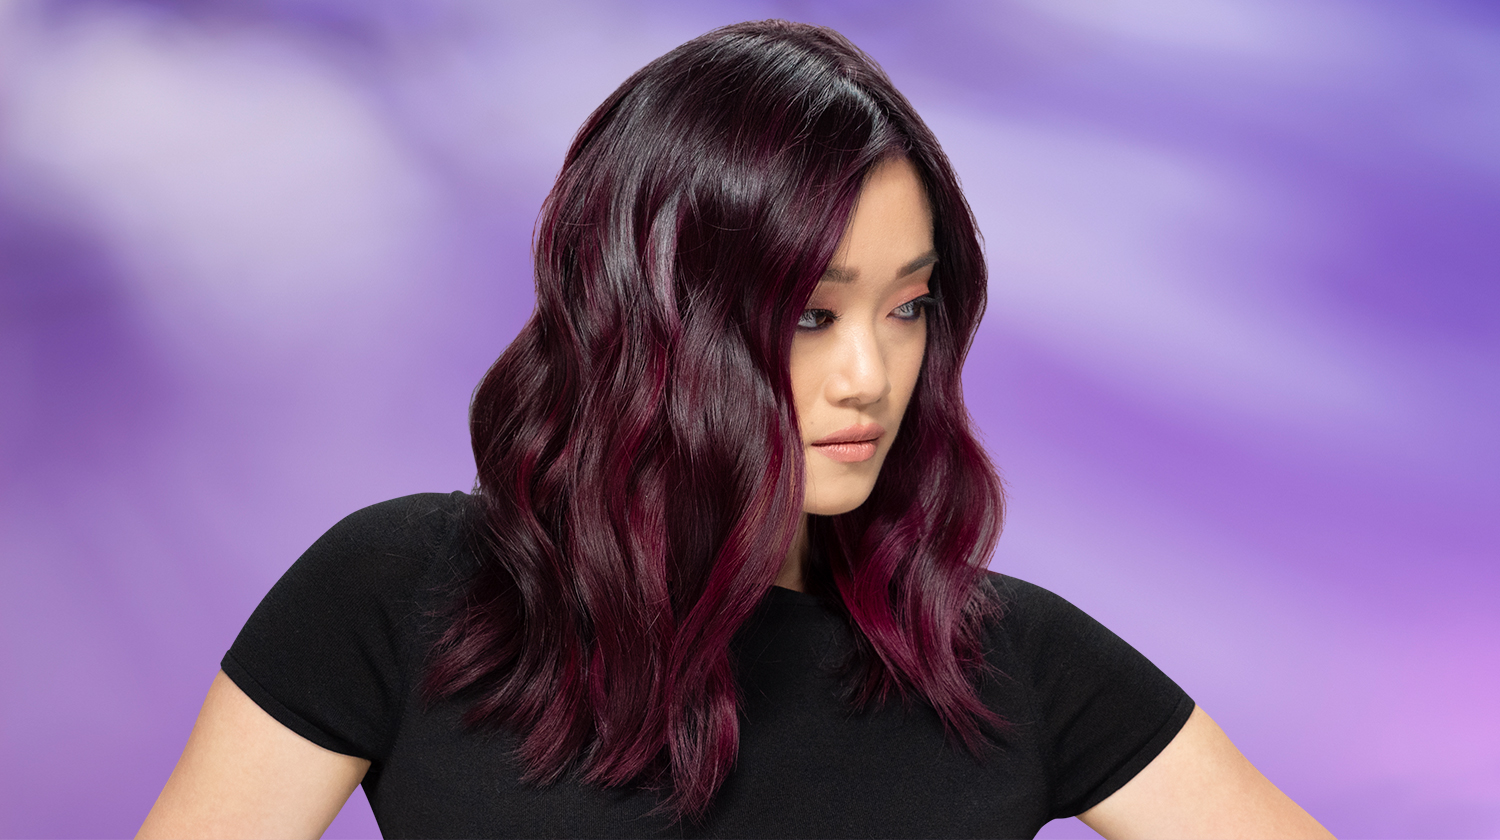 a picture of a female with dark red violet hair